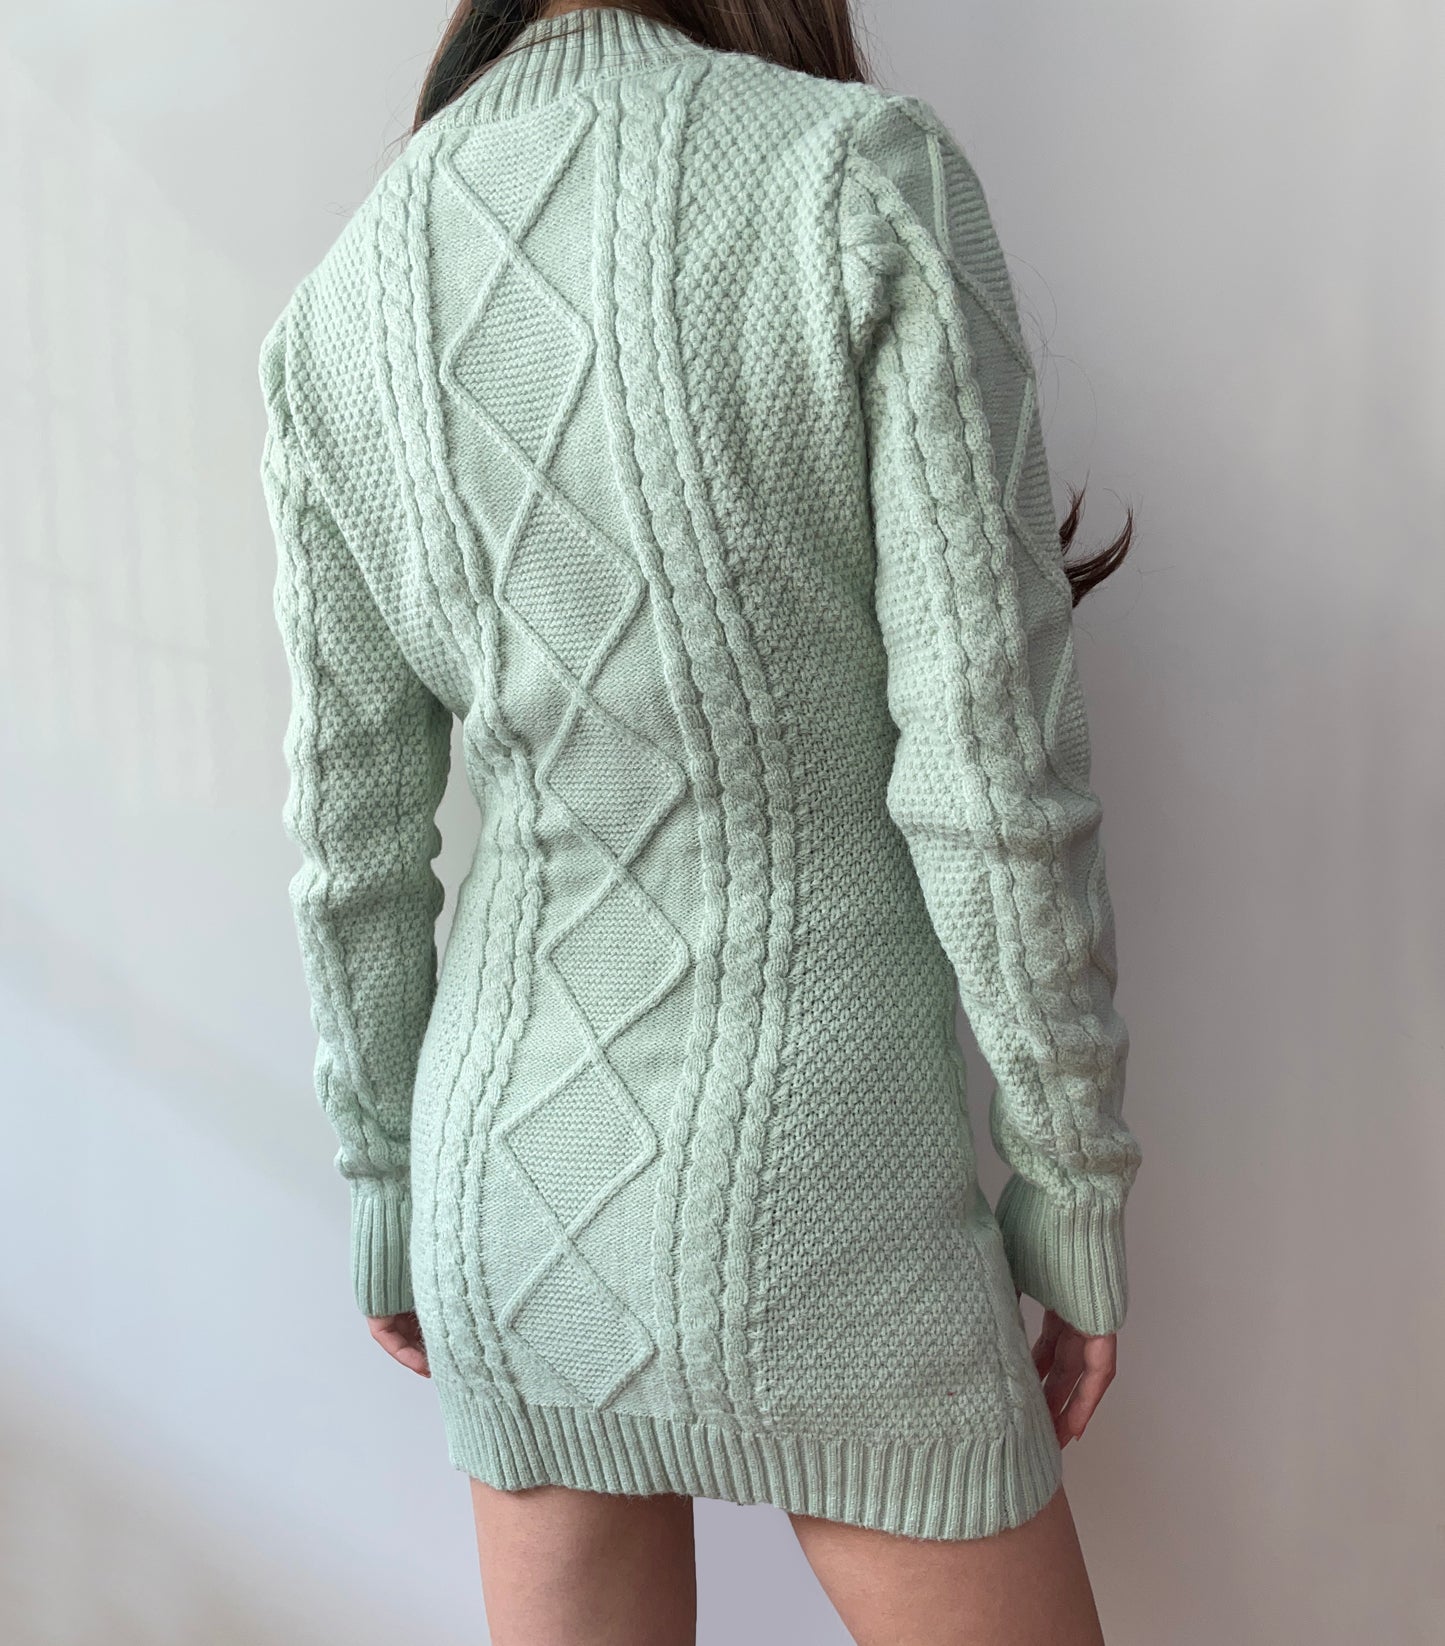 Button Cable Knit Sweater Dress (4 Colors)